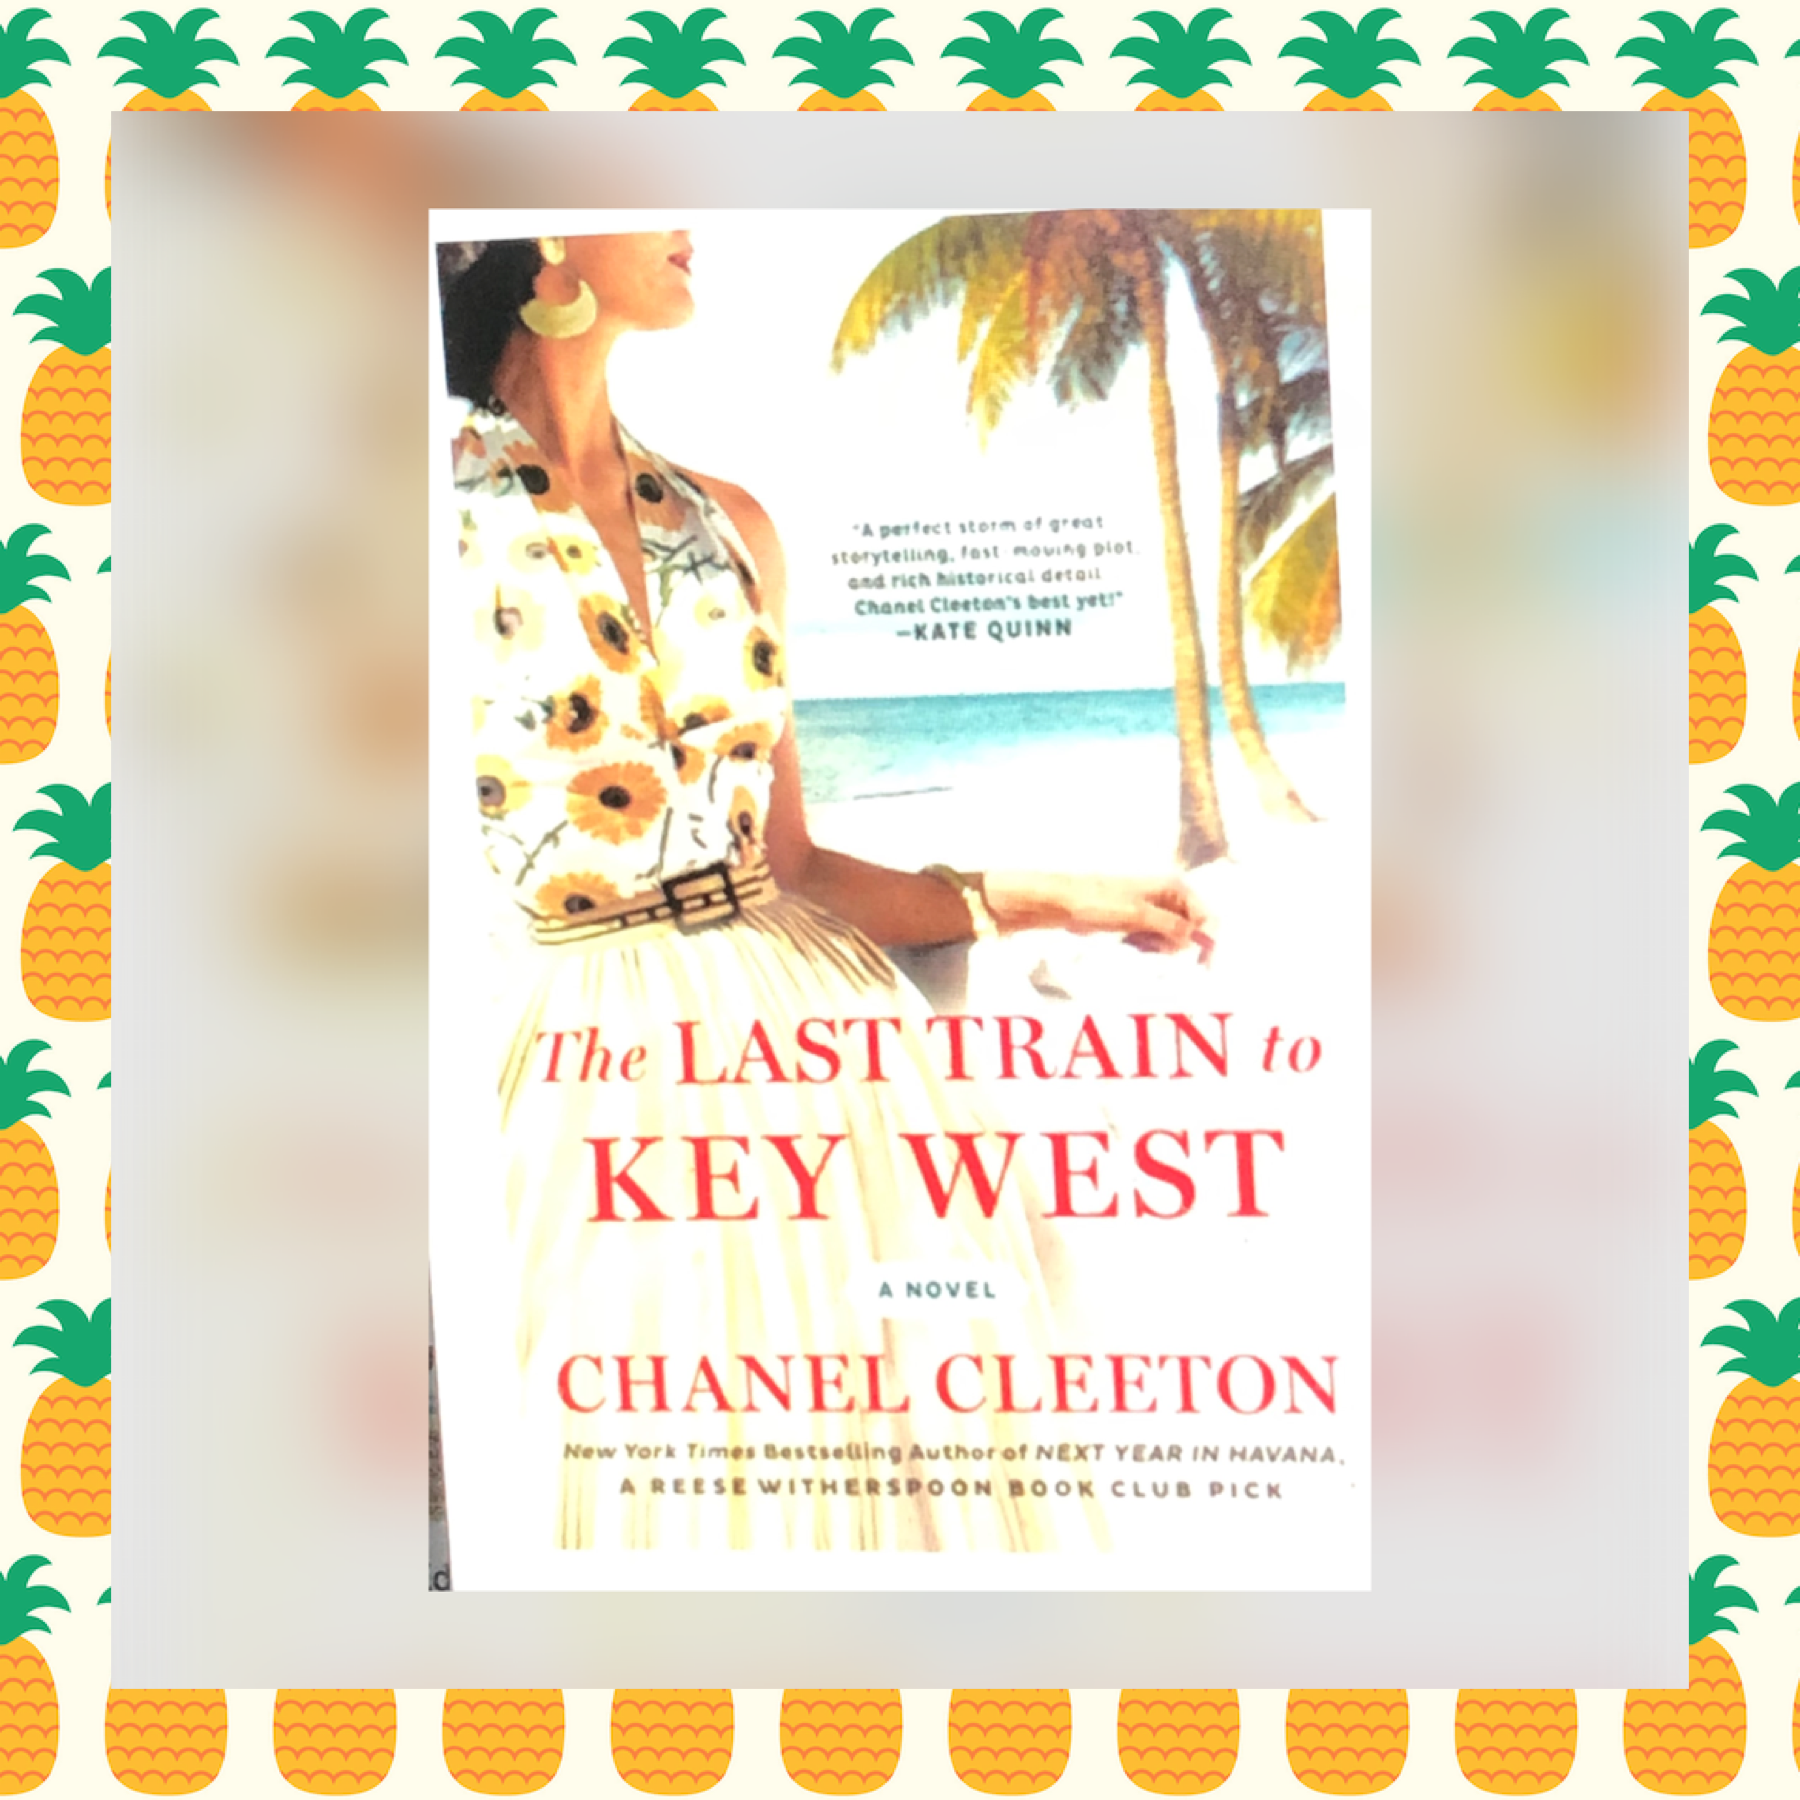 Linda's Book Obsession Reviews “The Last Train to Key West” by Chanel  Cleeton, Berkley Publishing, June 2020 – Linda's Book Obsession